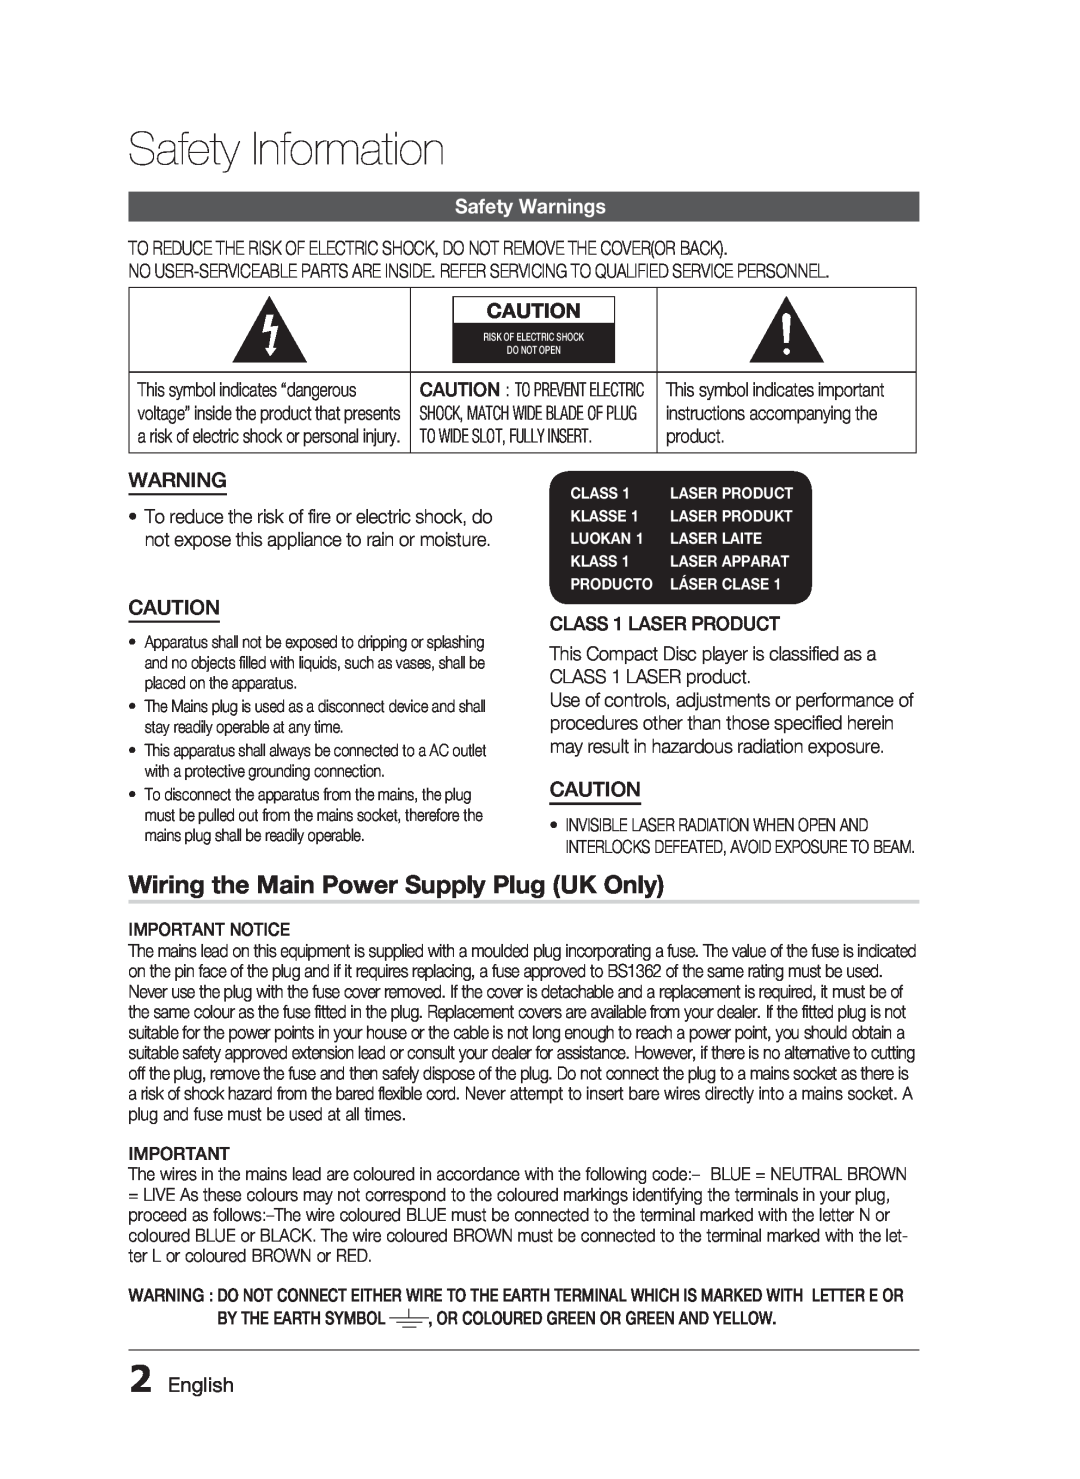 Samsung HT-C7300/XEF, HT-C7300/EDC Safety Information, Wiring the Main Power Supply Plug UK Only, Safety Warnings, English 